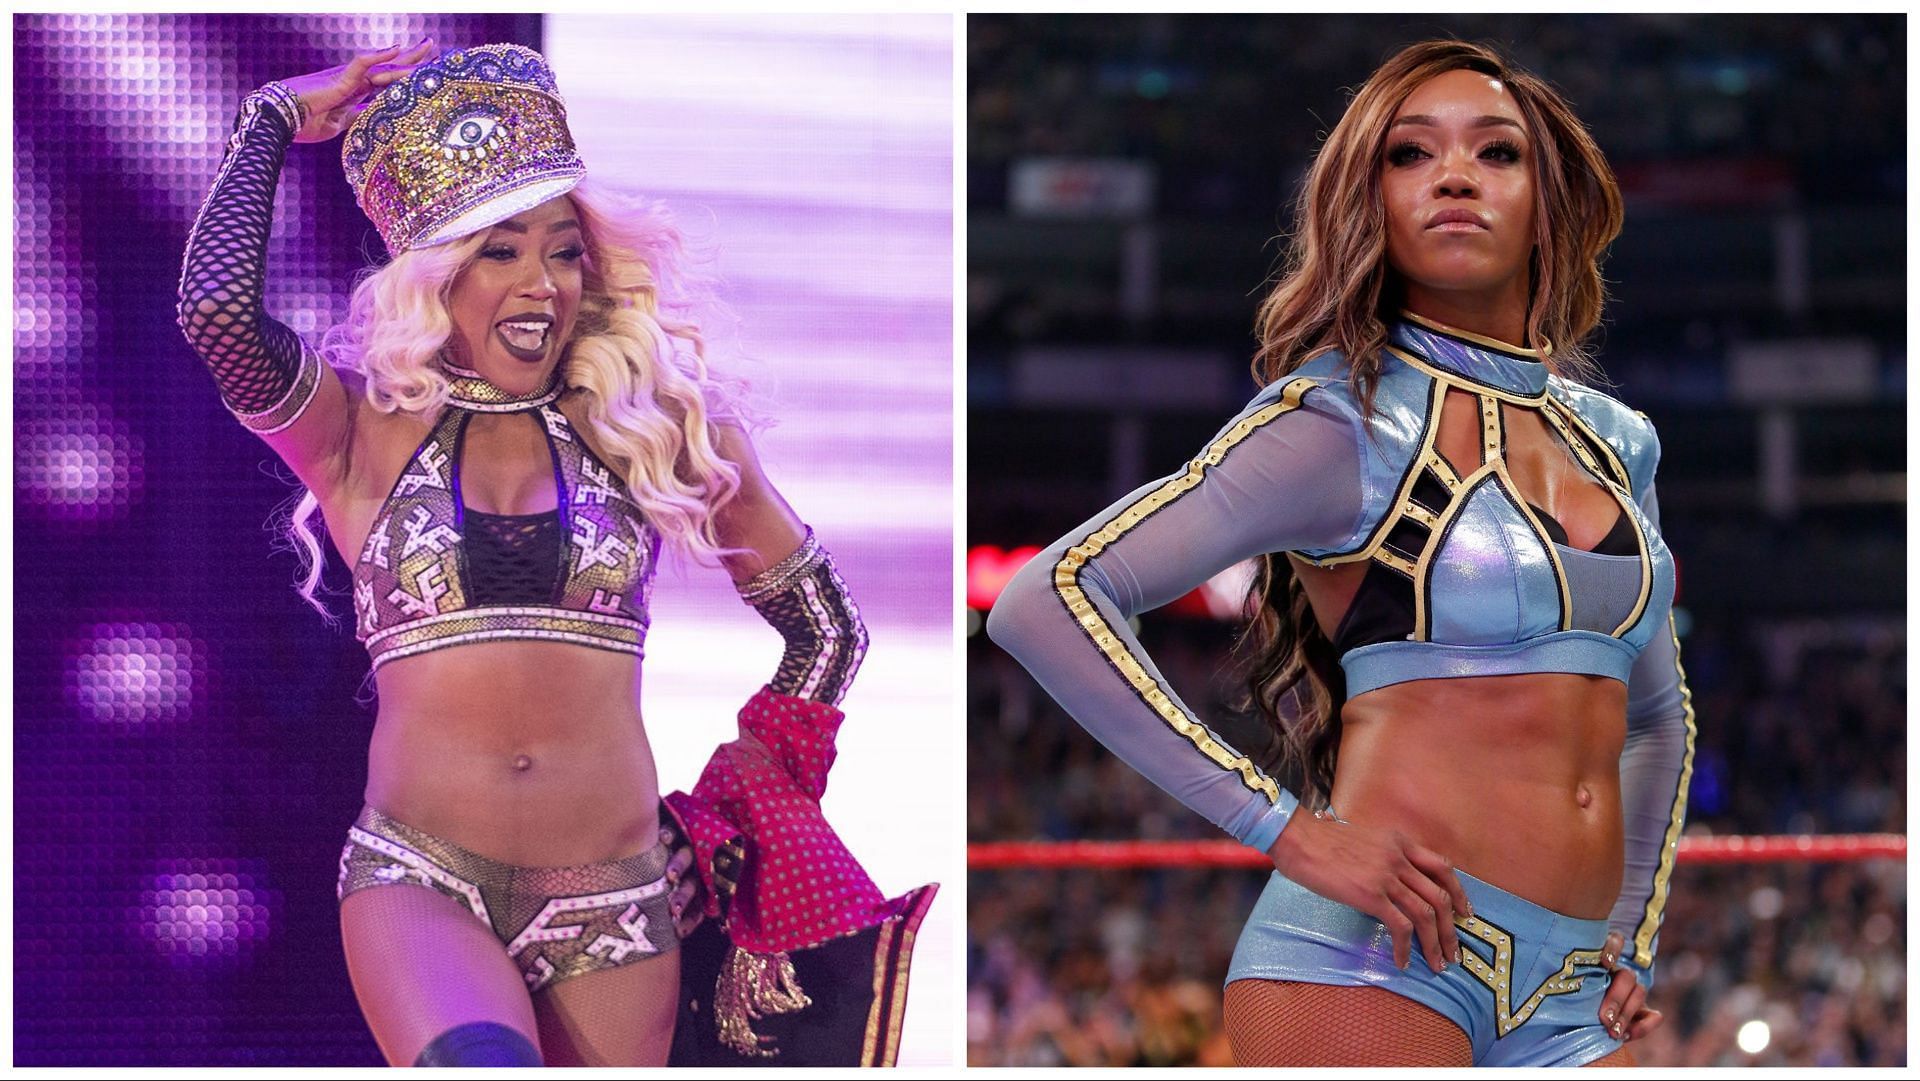 Alicia Fox arrives on WWE RAW, Fox poses in the ring